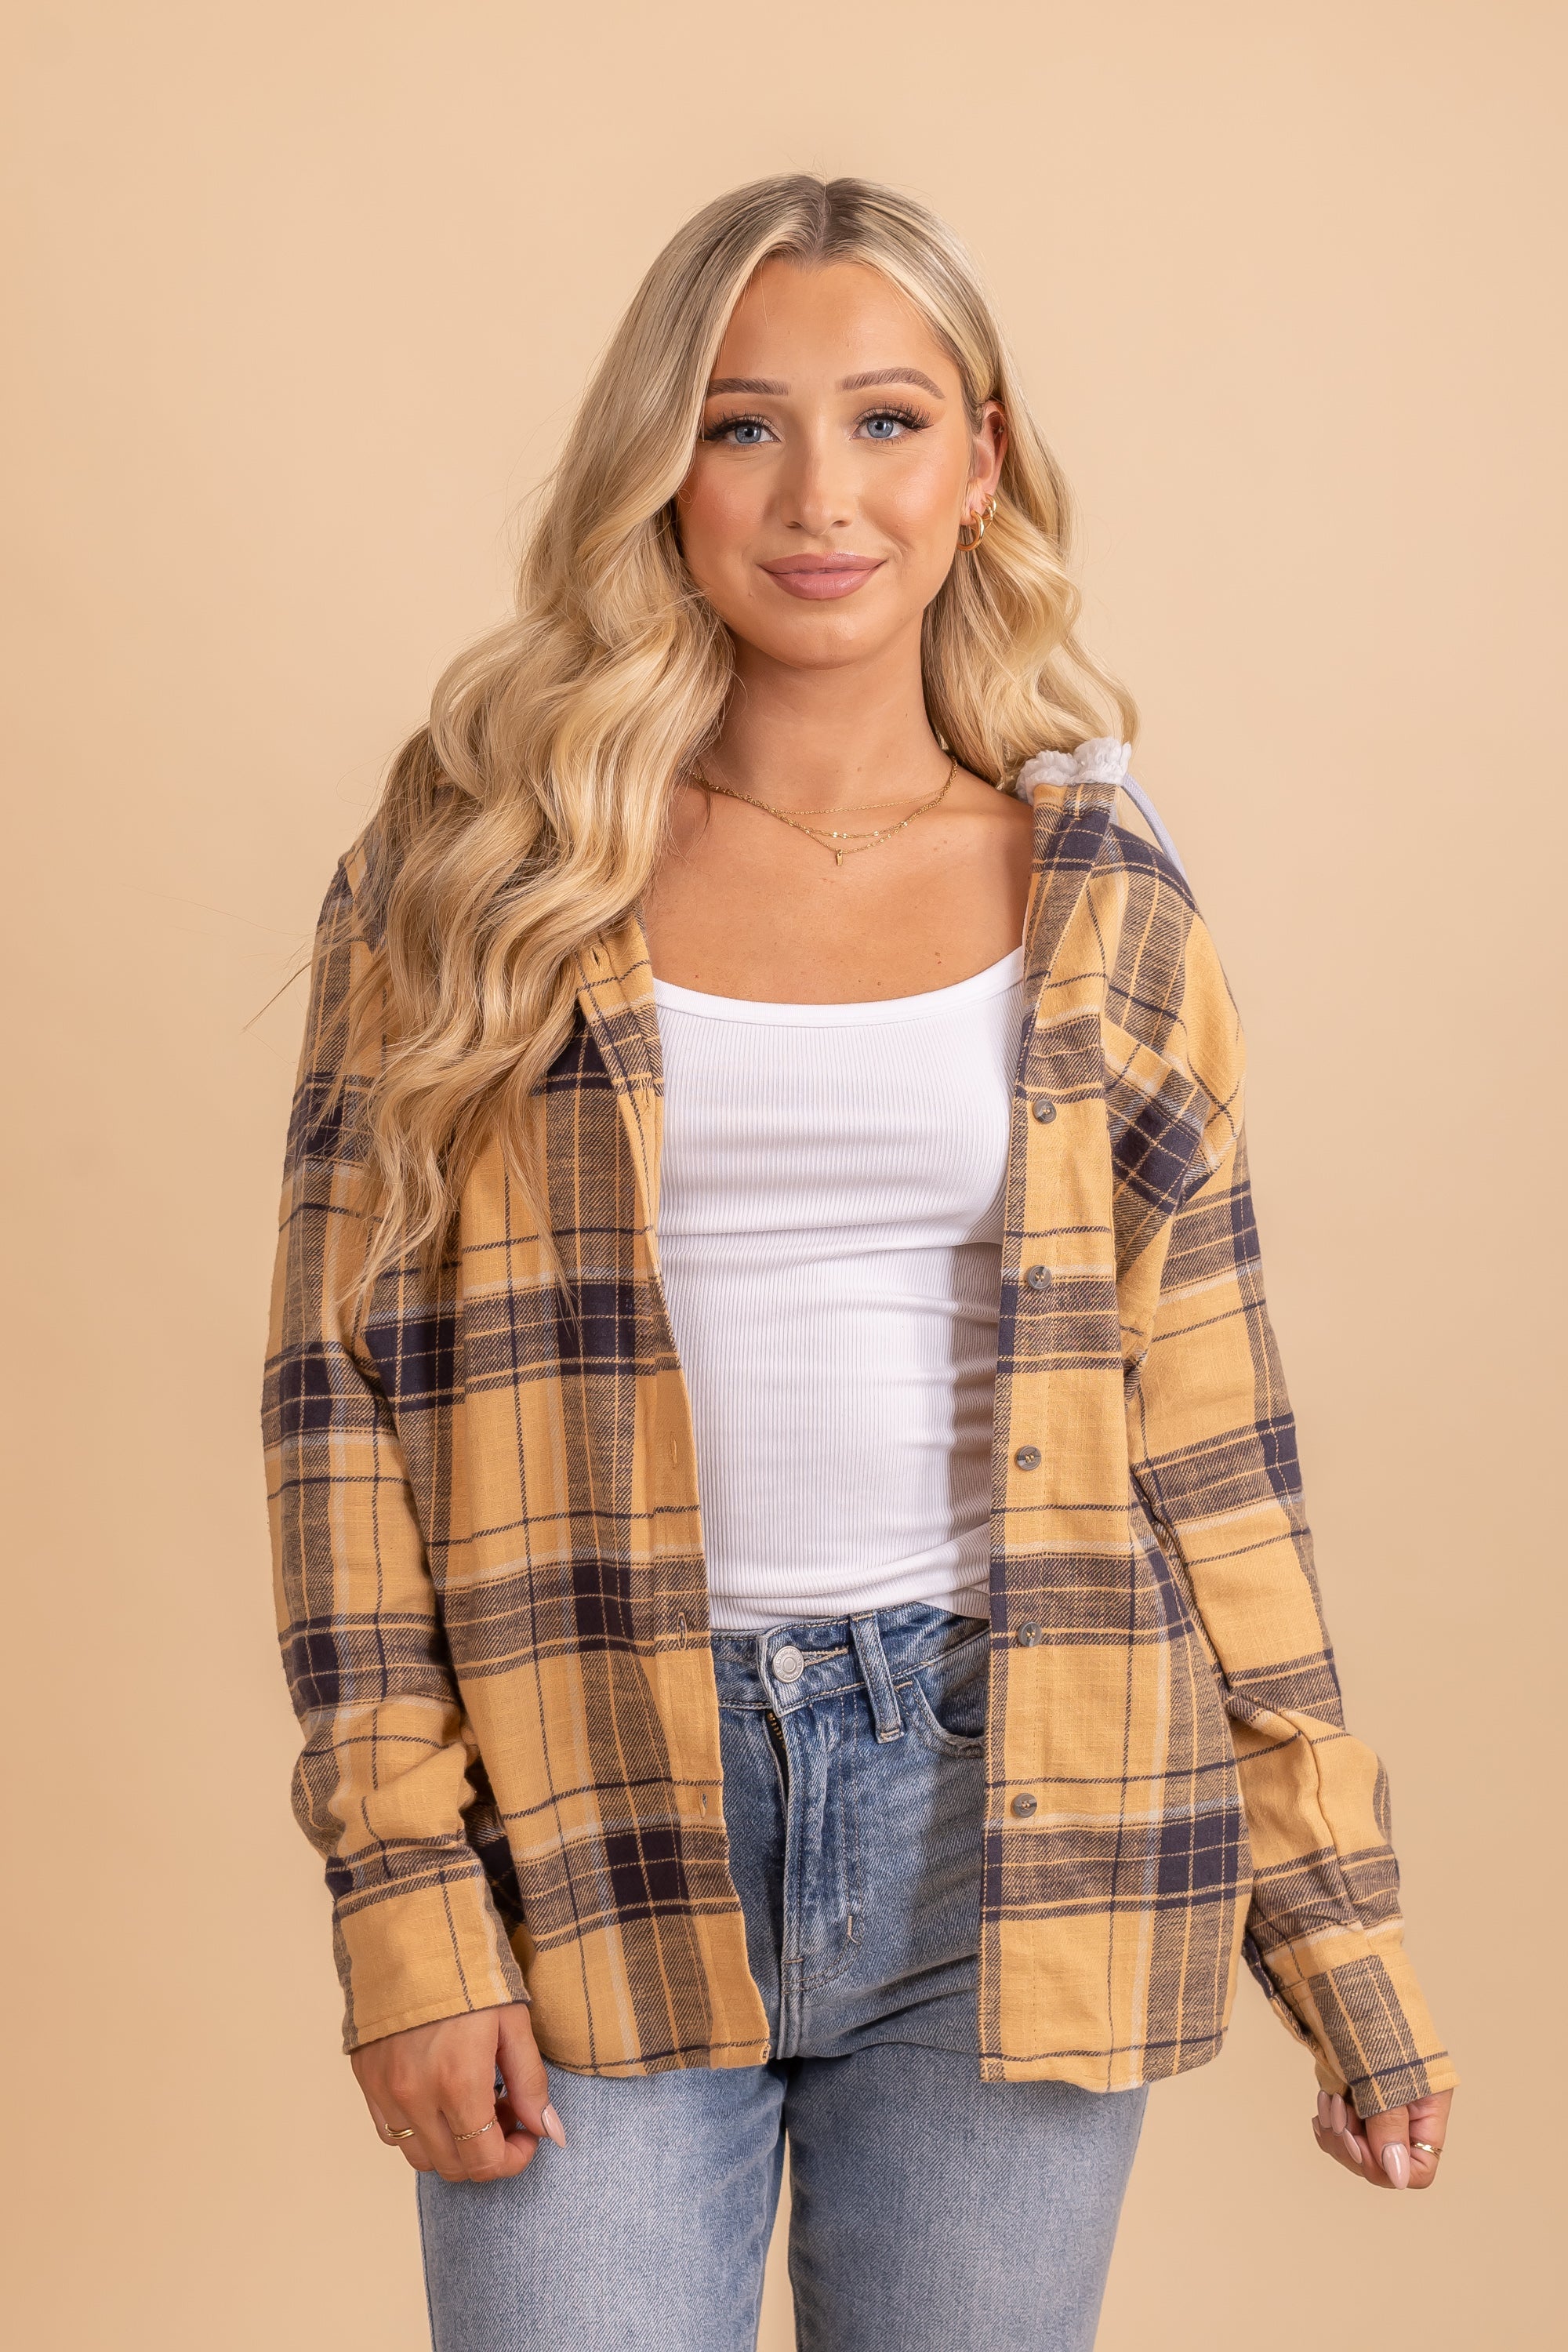 Thinking Ahead Hooded Flannel Shirt